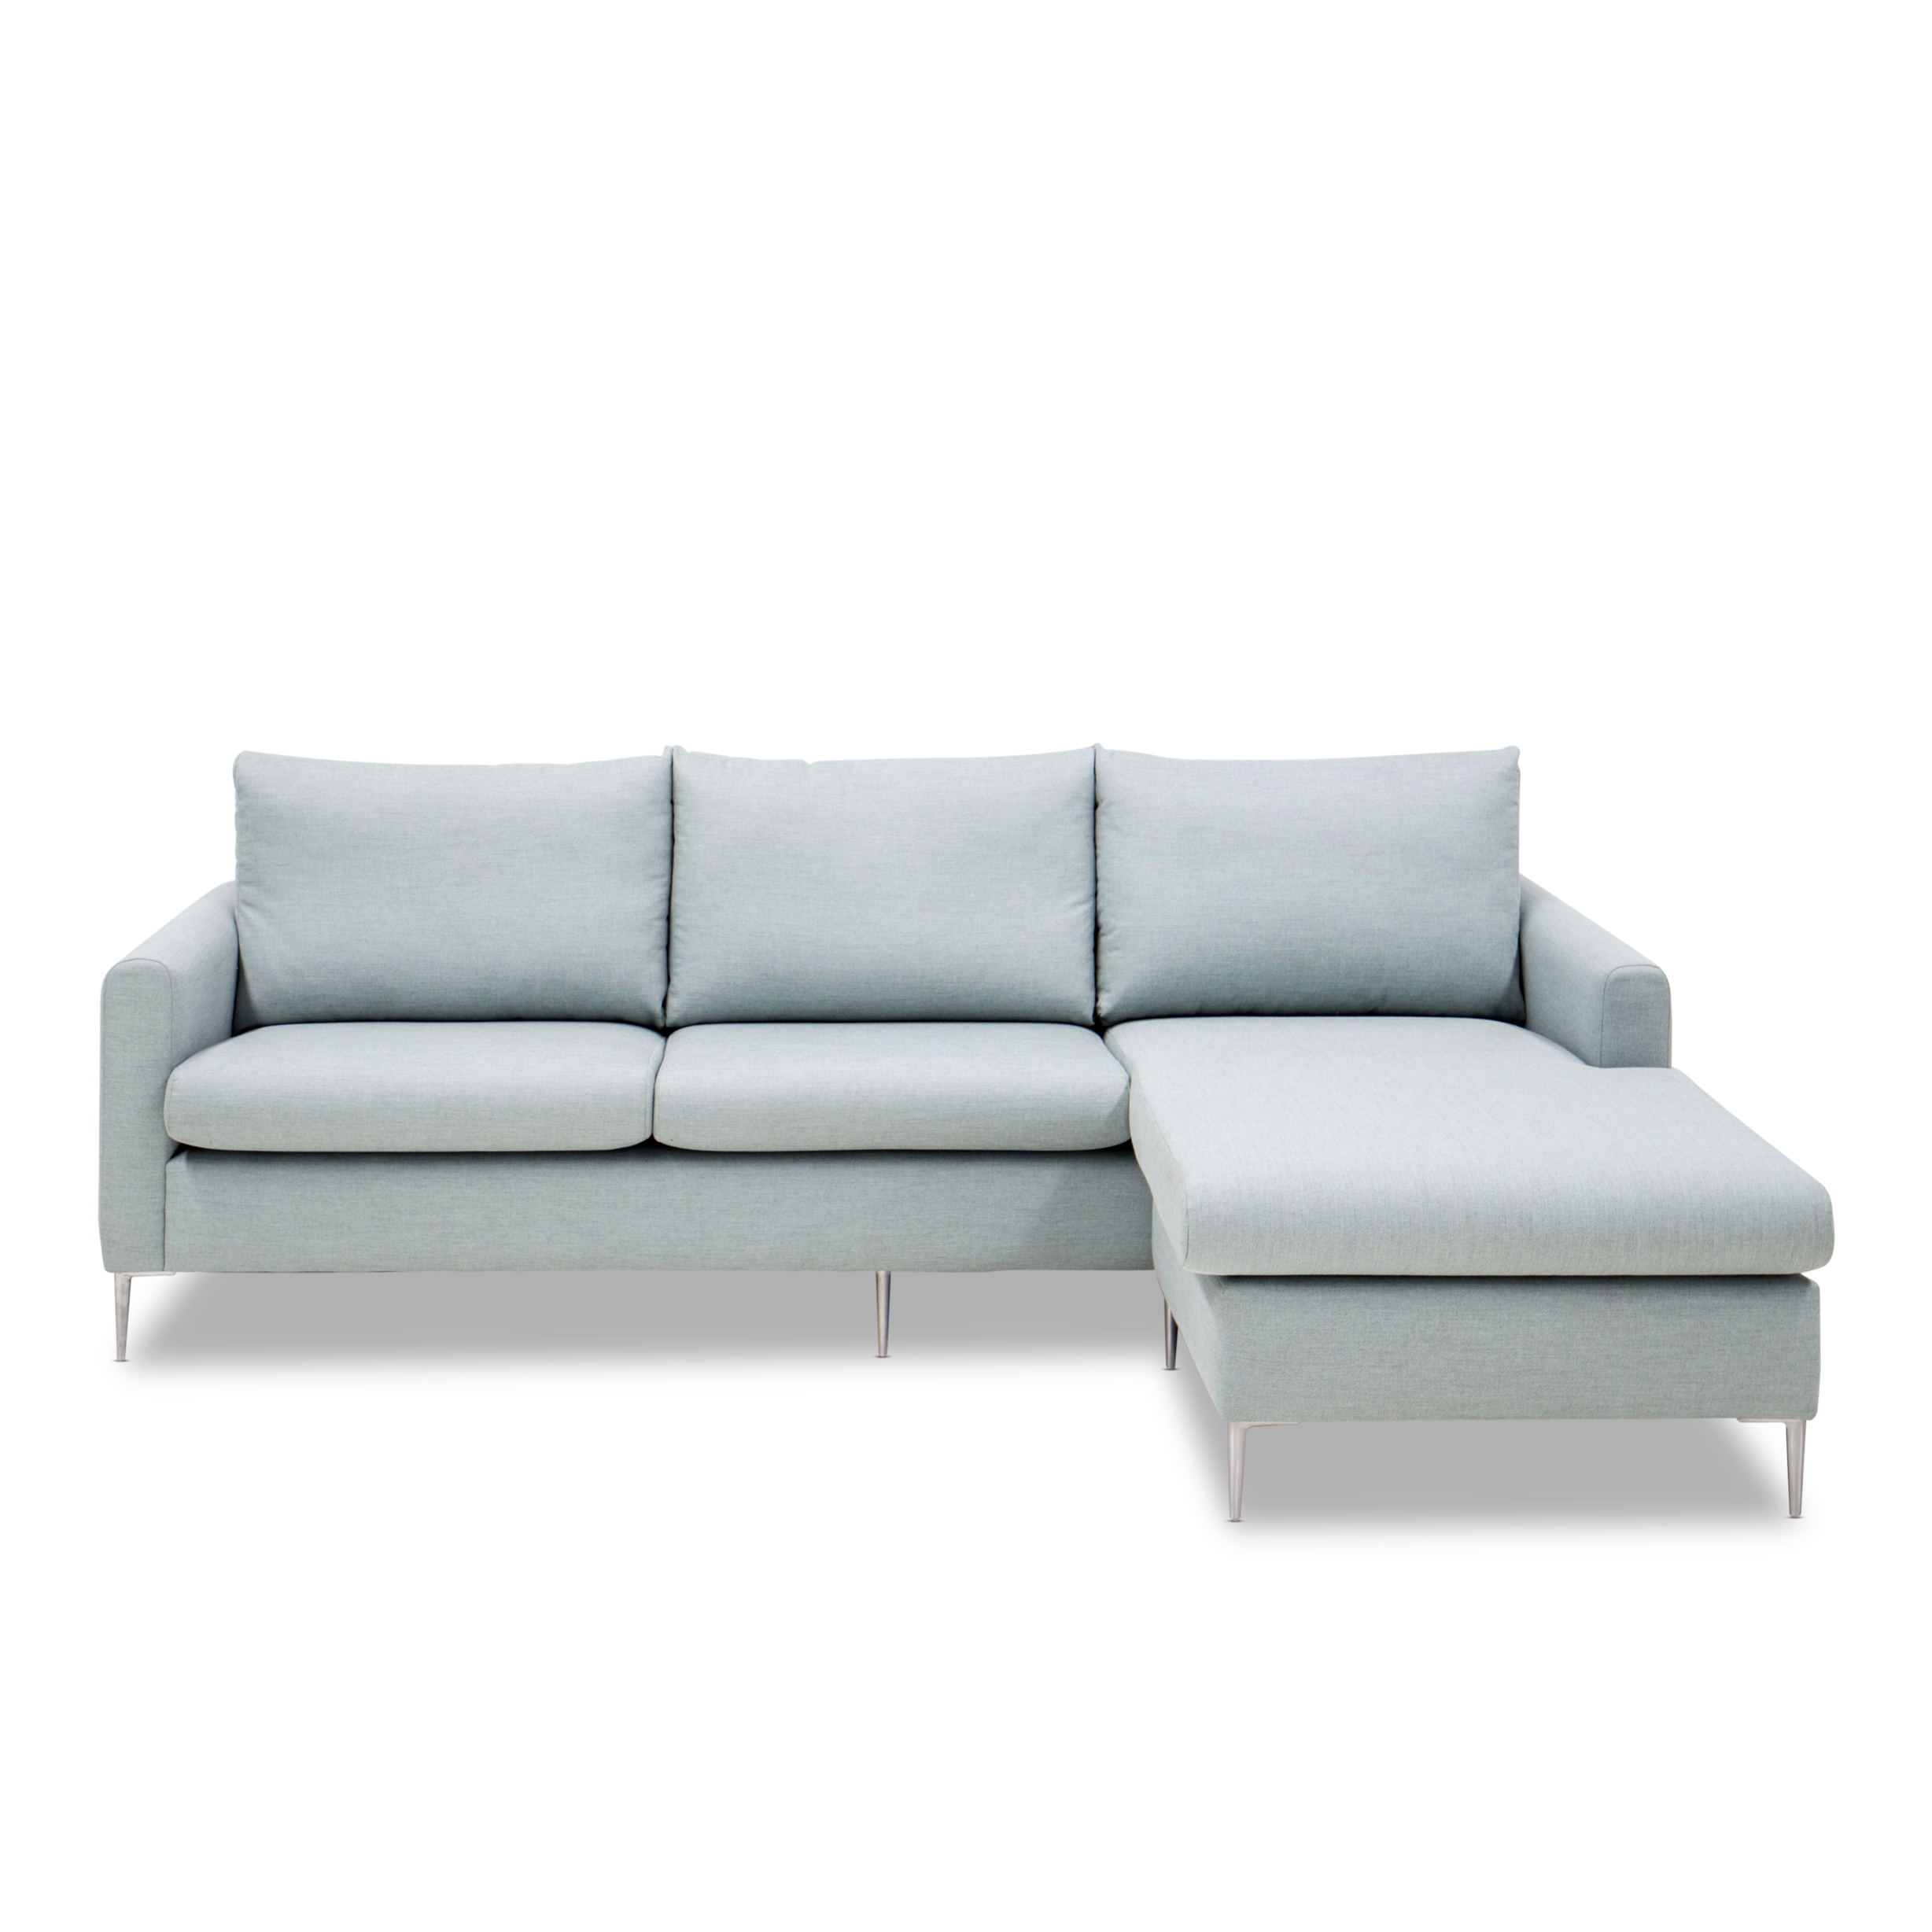 Delta Sofa With A Chaise